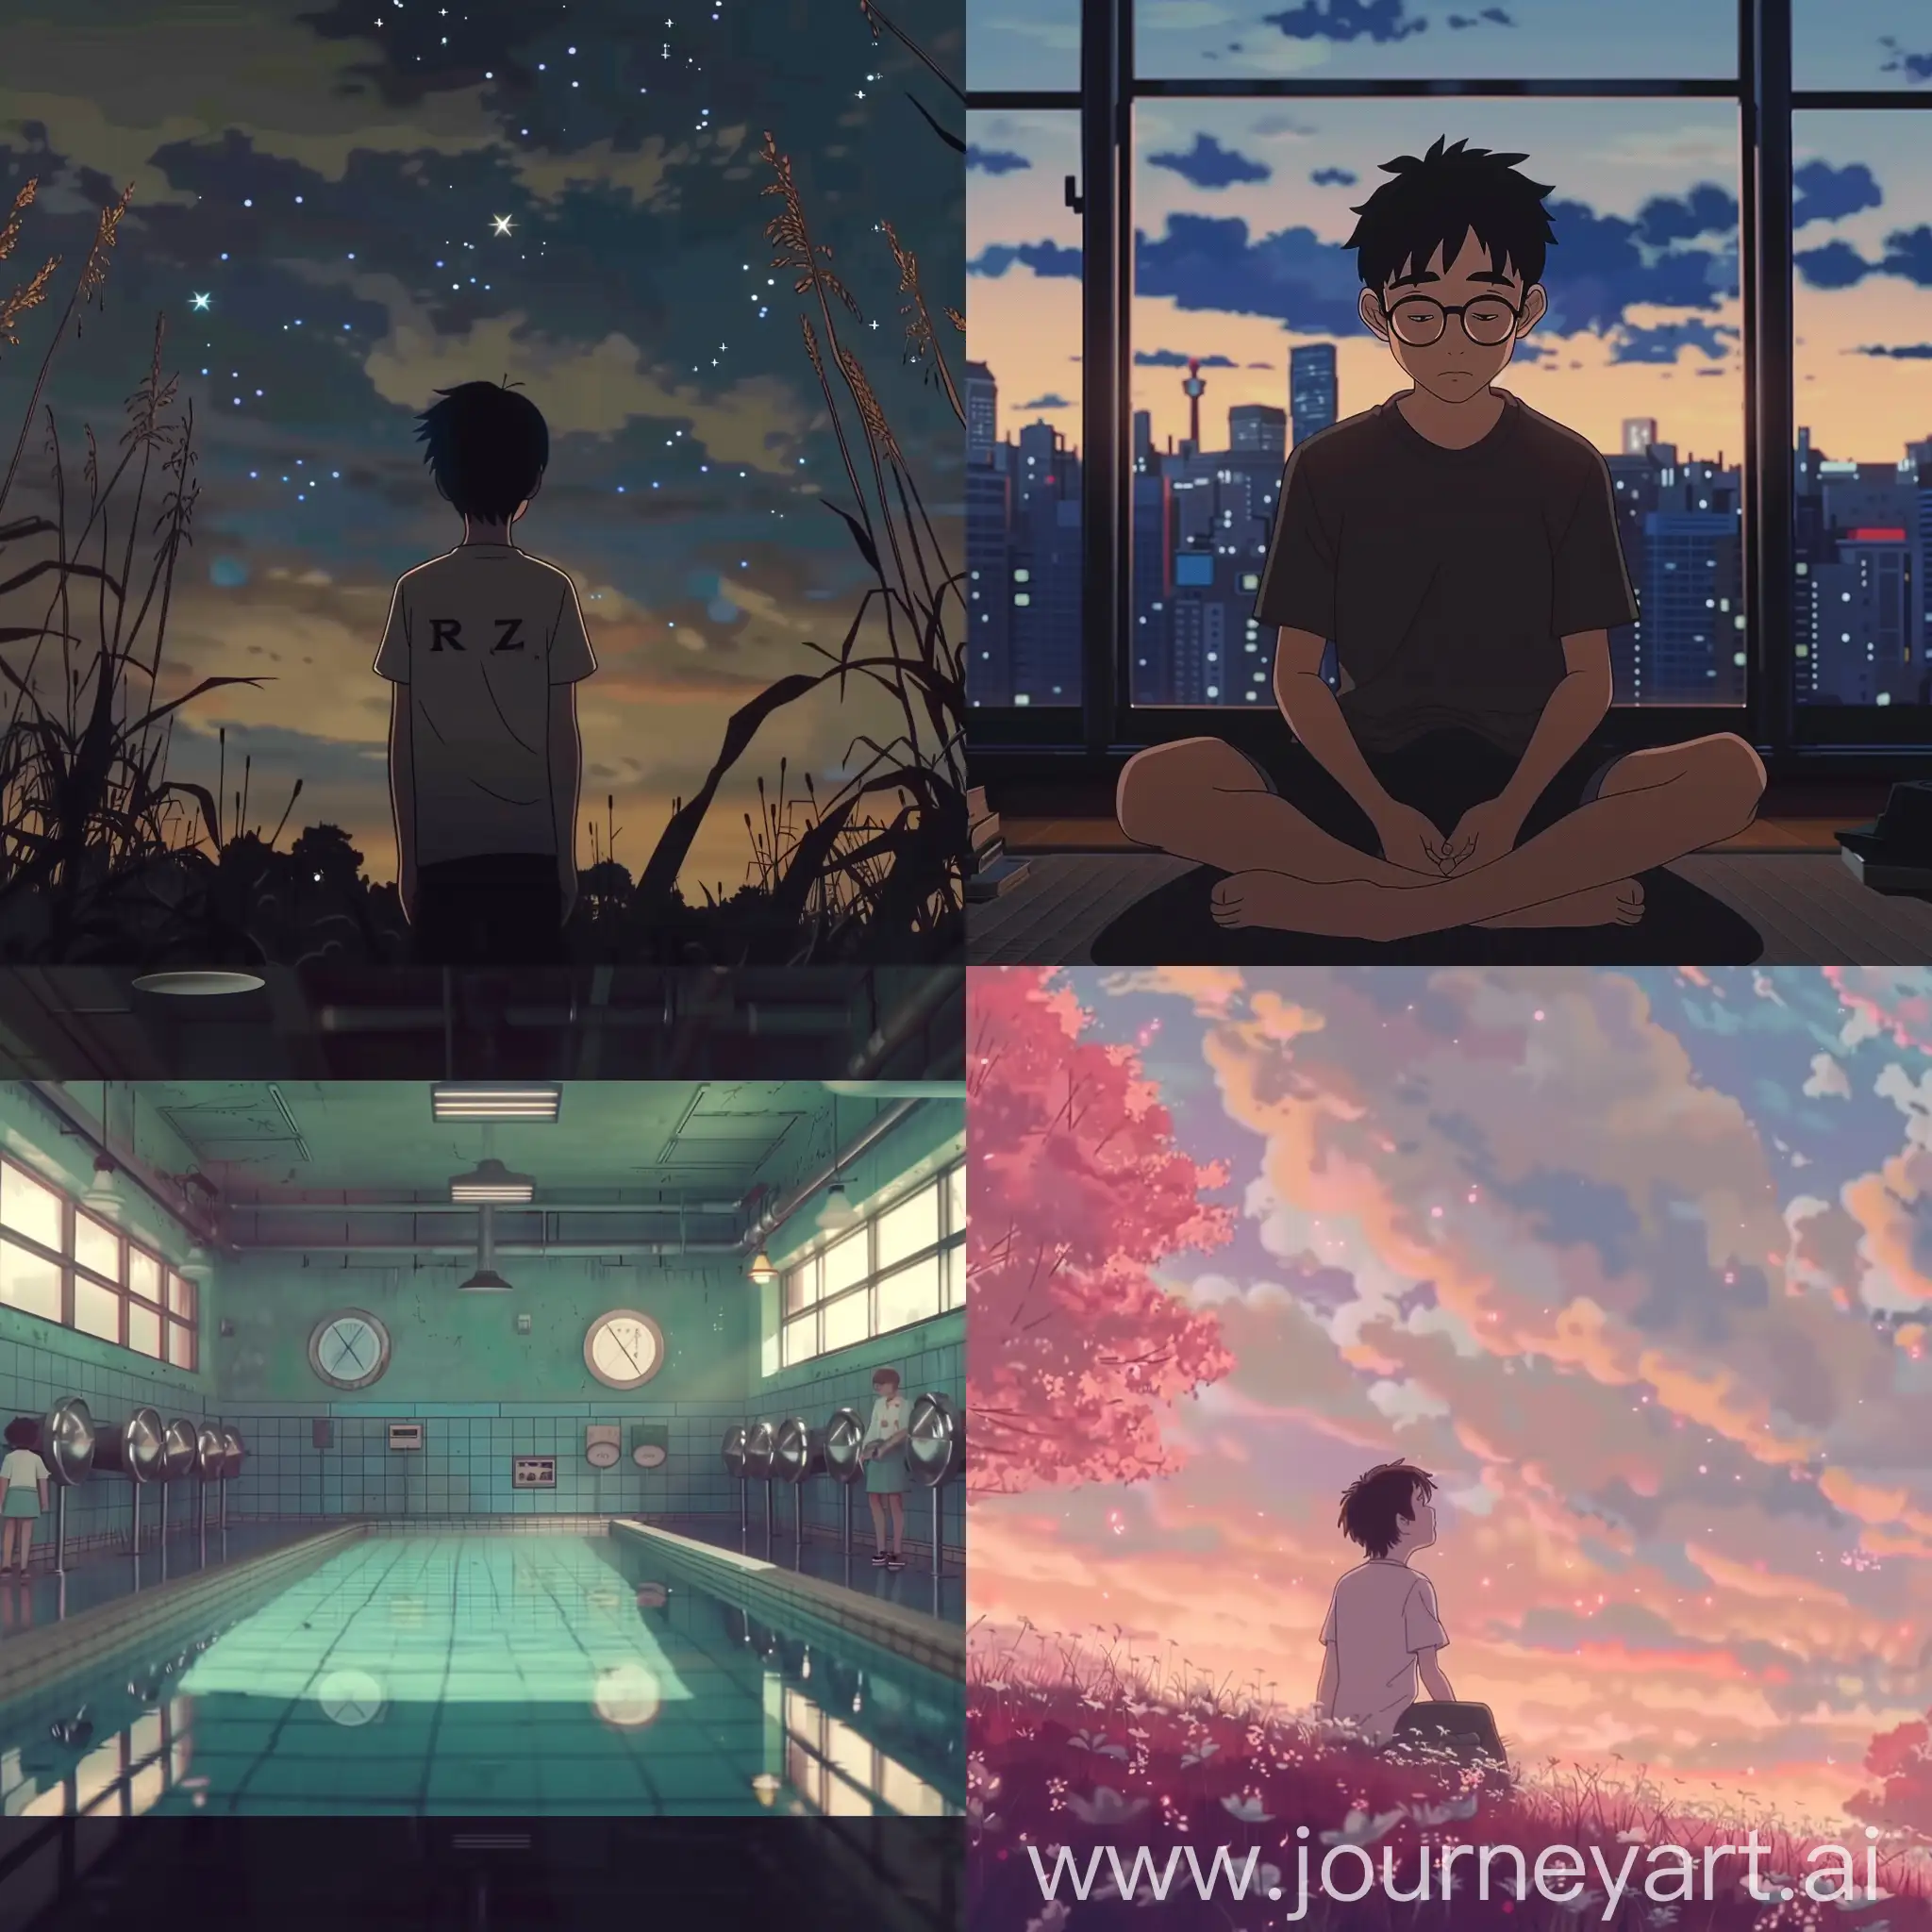 R.e.m. Losing my religion videoclip in the style of ghibli